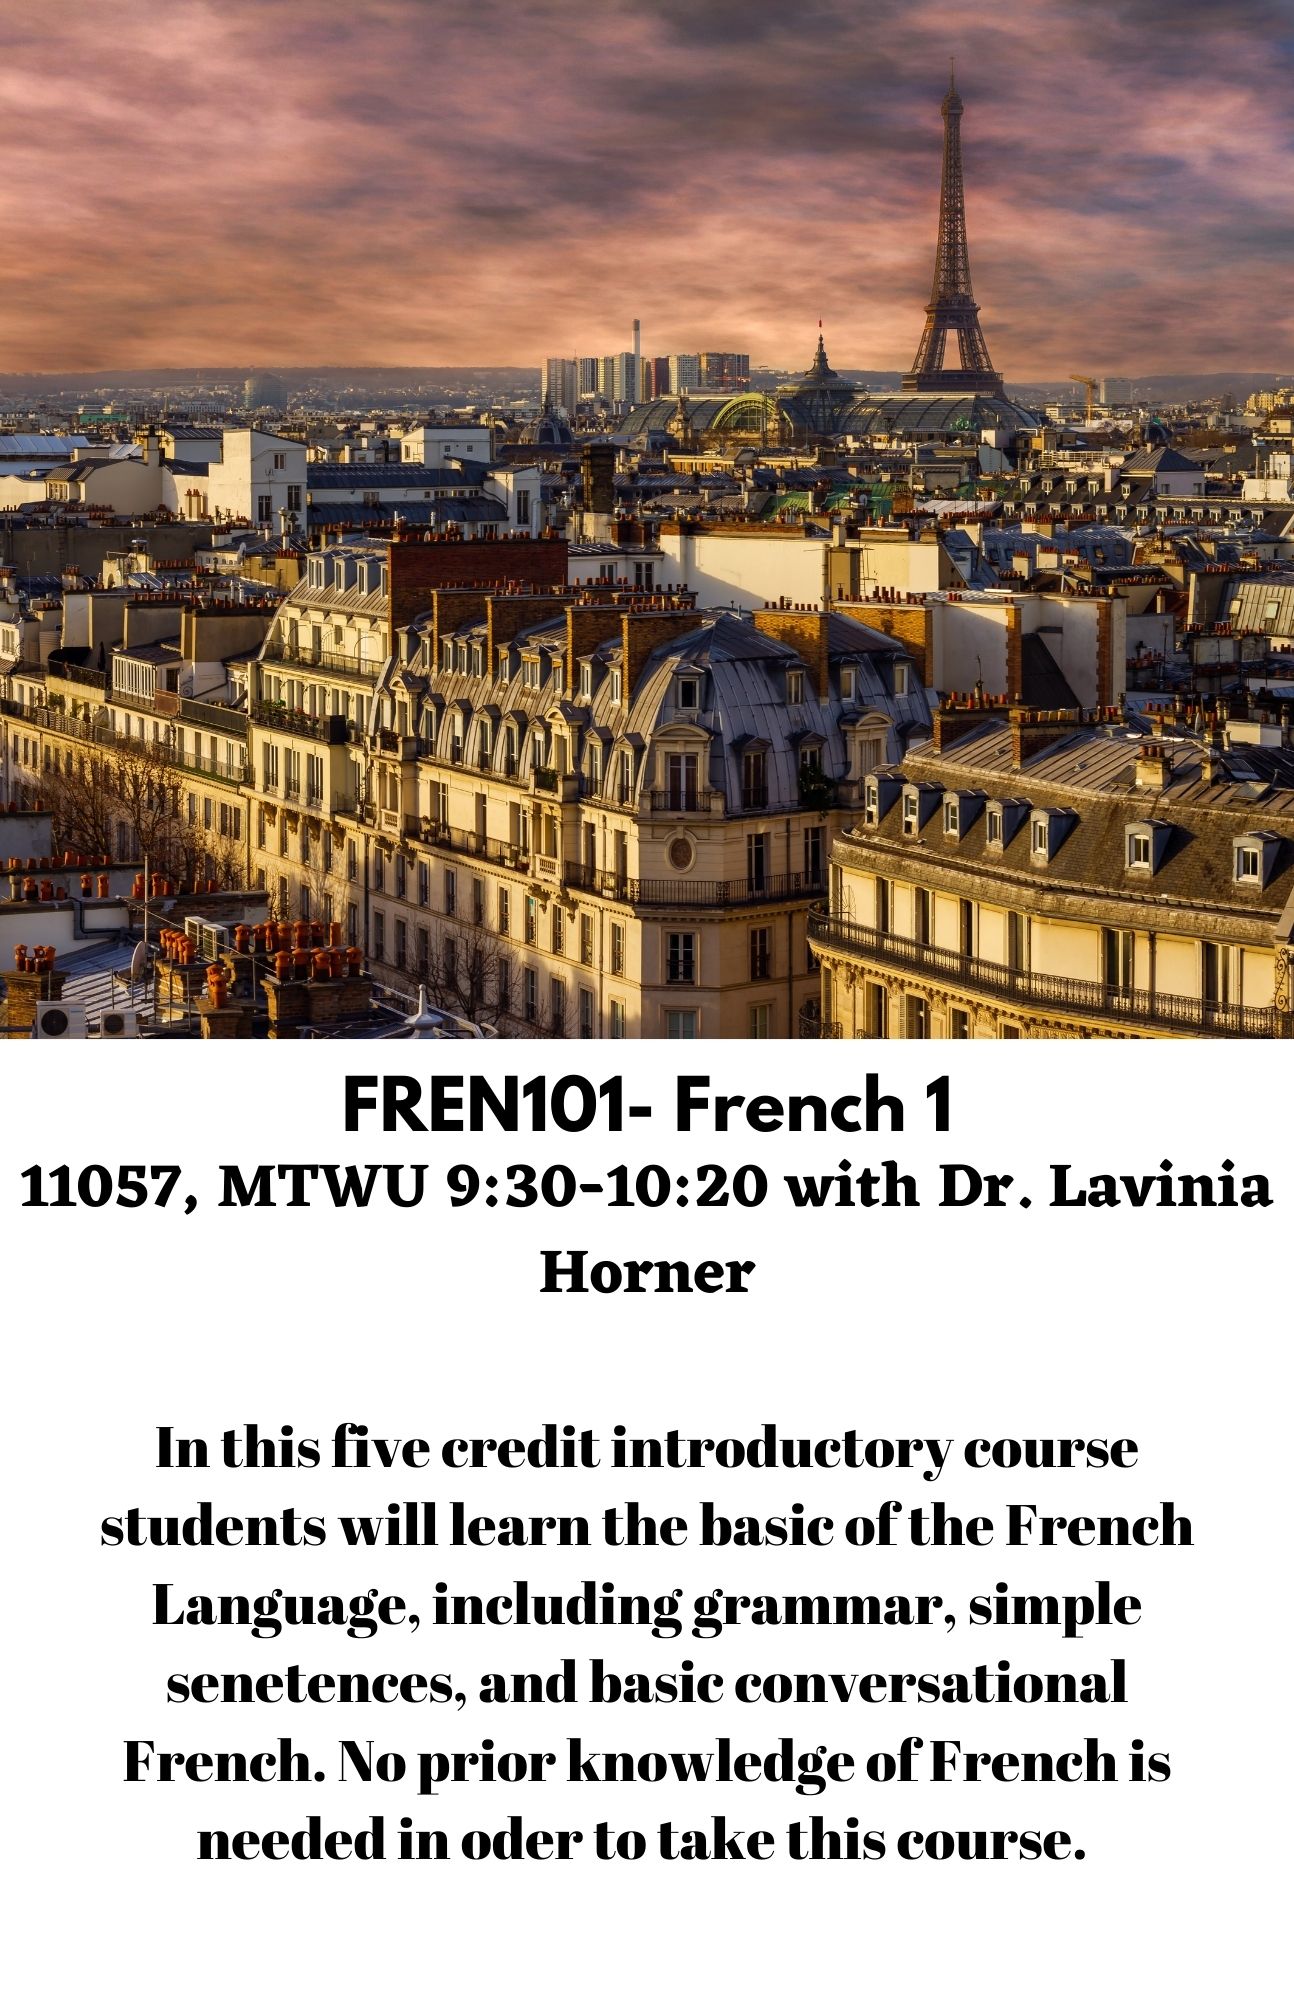 FREN101- French 1. 11057, MTWU 9:30-10:20 with Dr. Lavinia Horner. In this five credit introductory course students will learn the basic of the French Language, including grammar, simple senetences, and basic conversational French. No prior knowledge of French is needed in oder to take this course. 